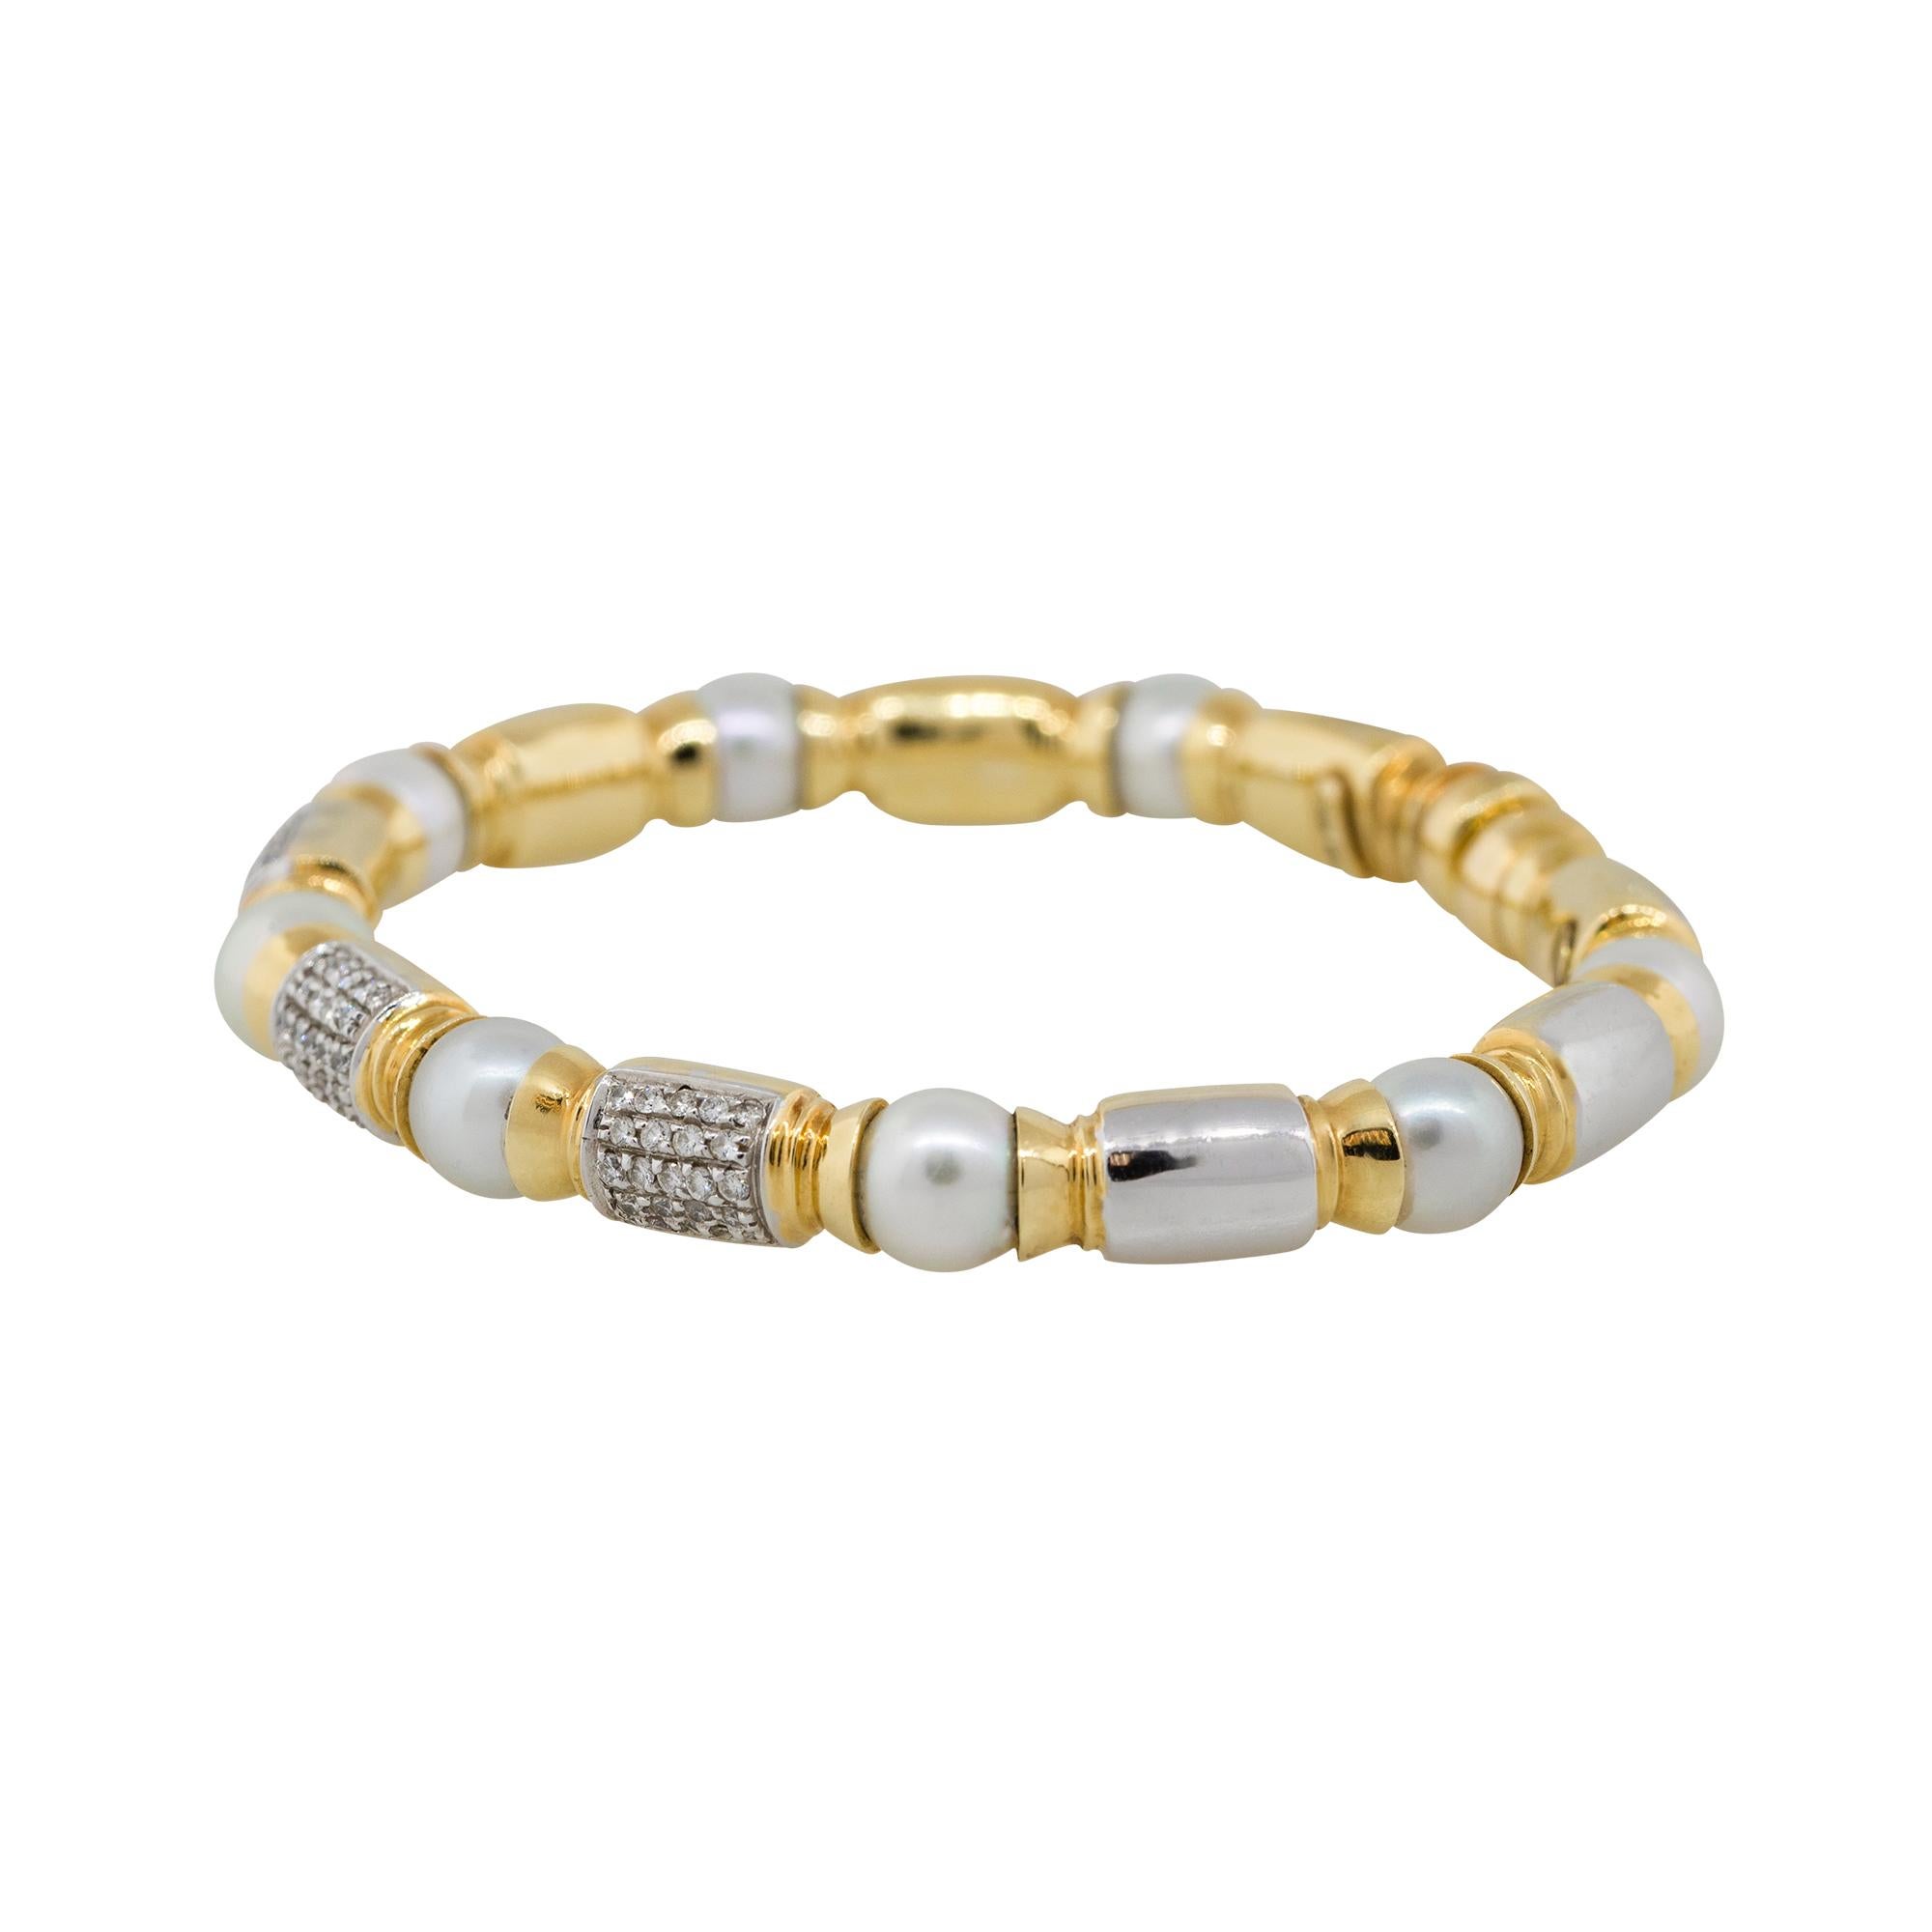 Material: 18k yellow gold
Diamond details: Approx. 0.75ctw of round cut diamonds. Diamonds are G/H in color and VS in clarity
Clasps: Open Cuff
Total Weight: 30.9g (19.8dwt)  
Bracelet measurements: 2.50